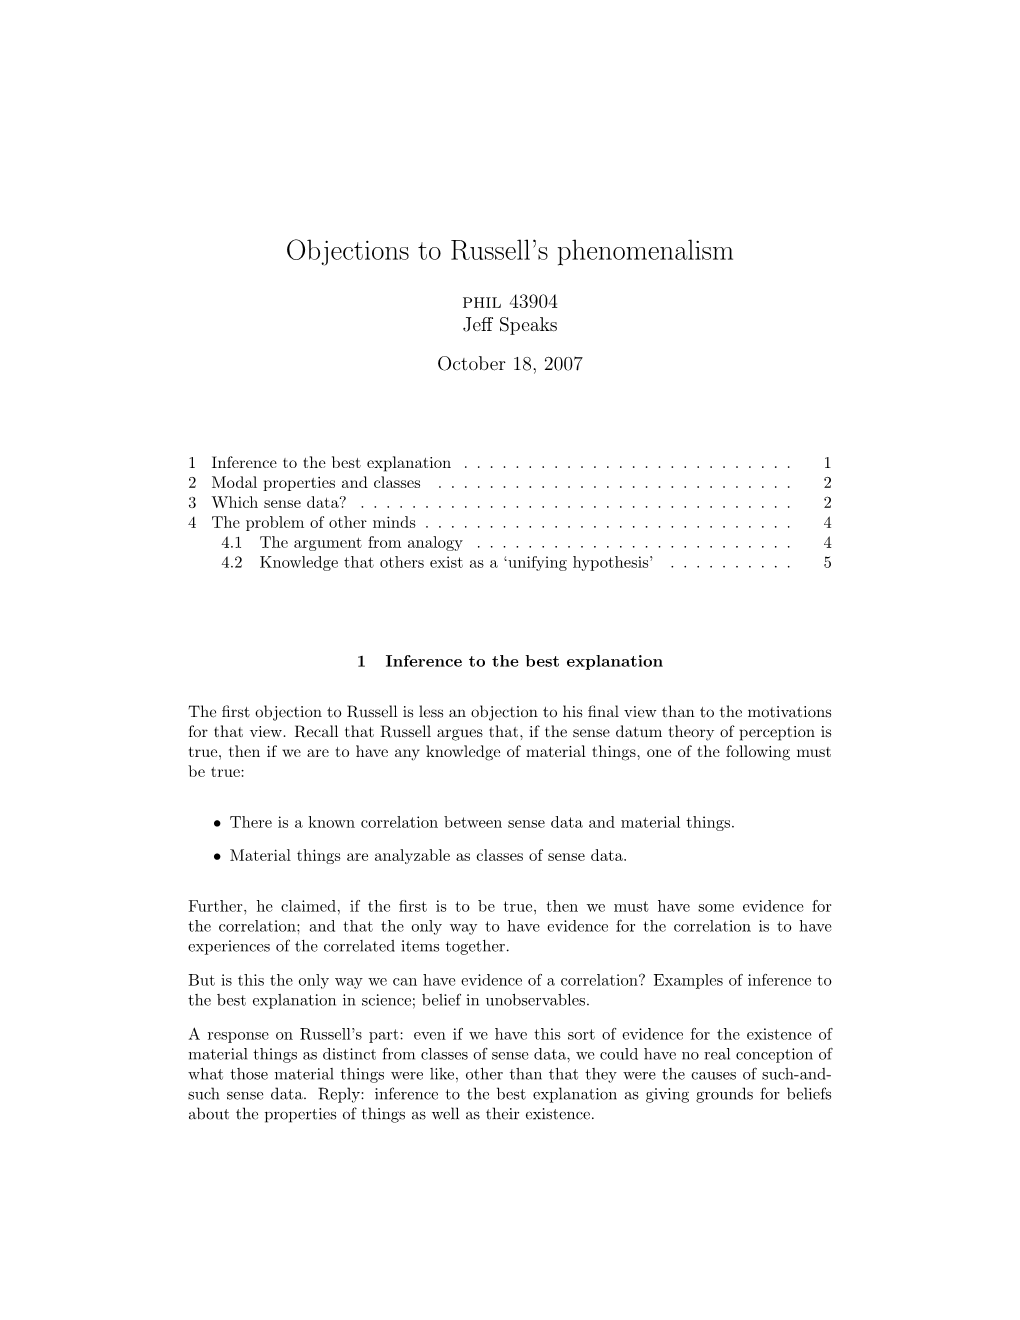 Objections to Russell's Phenomenalism